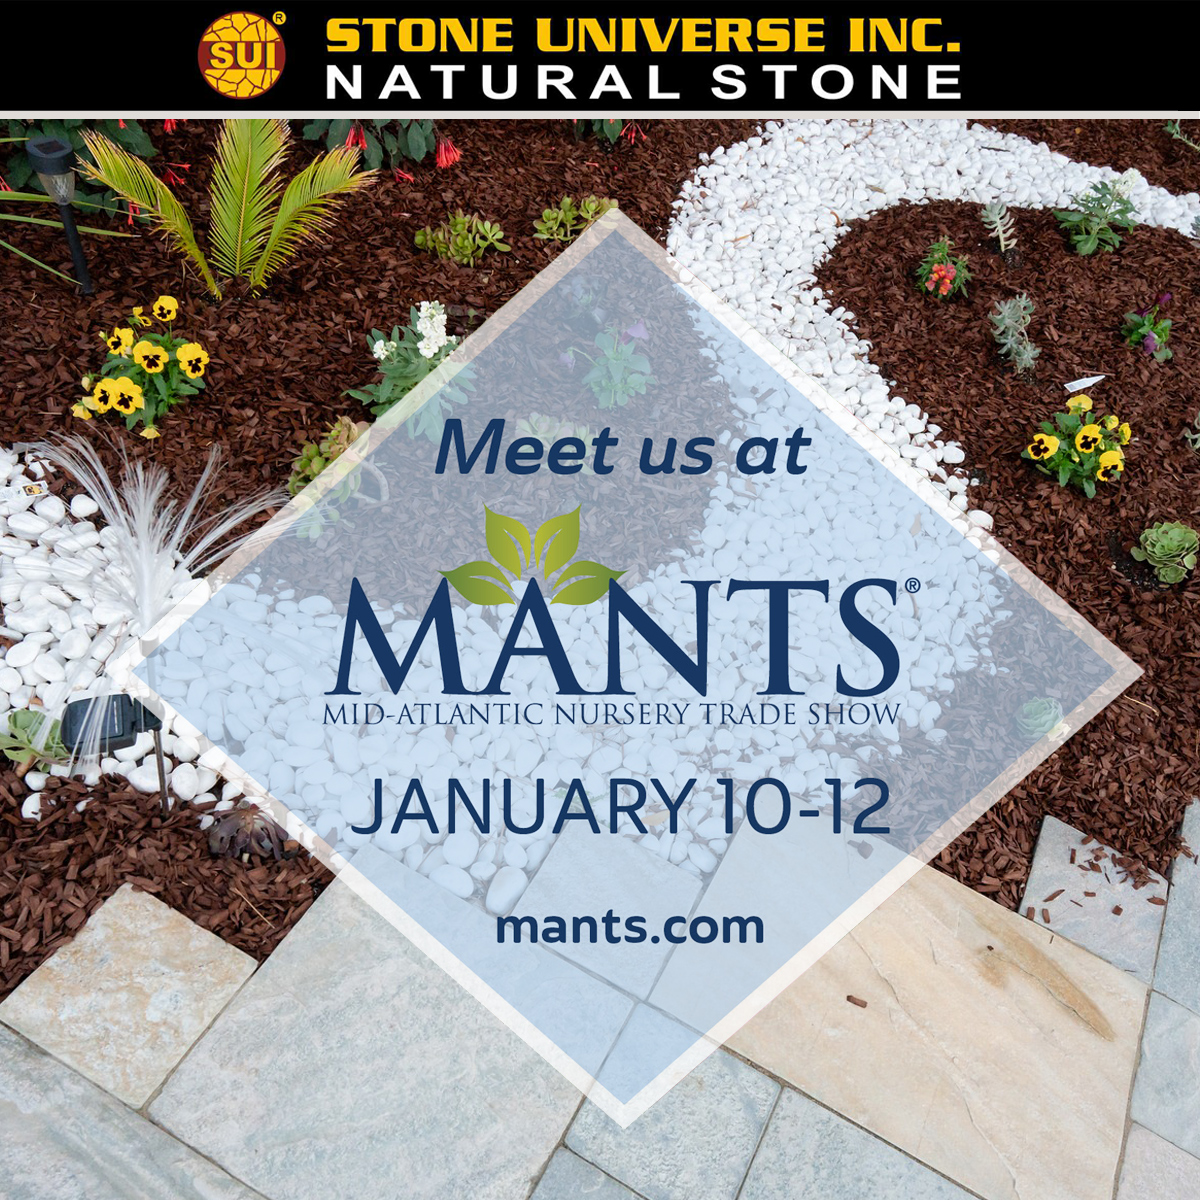 Visit: suistone.com/events/
We are all set to showcase you Our finest Nursery Product collection.
✨ Come Visit us at MANTS 2024
✨ BOOTH 2015
✨ Baltimore, MD
 
 #exhibition #exhibitors #MANTS2024 #MANTSBaltimore #GreenIndustry #Landscaping #Hardscaping #Ontario #Tuesday